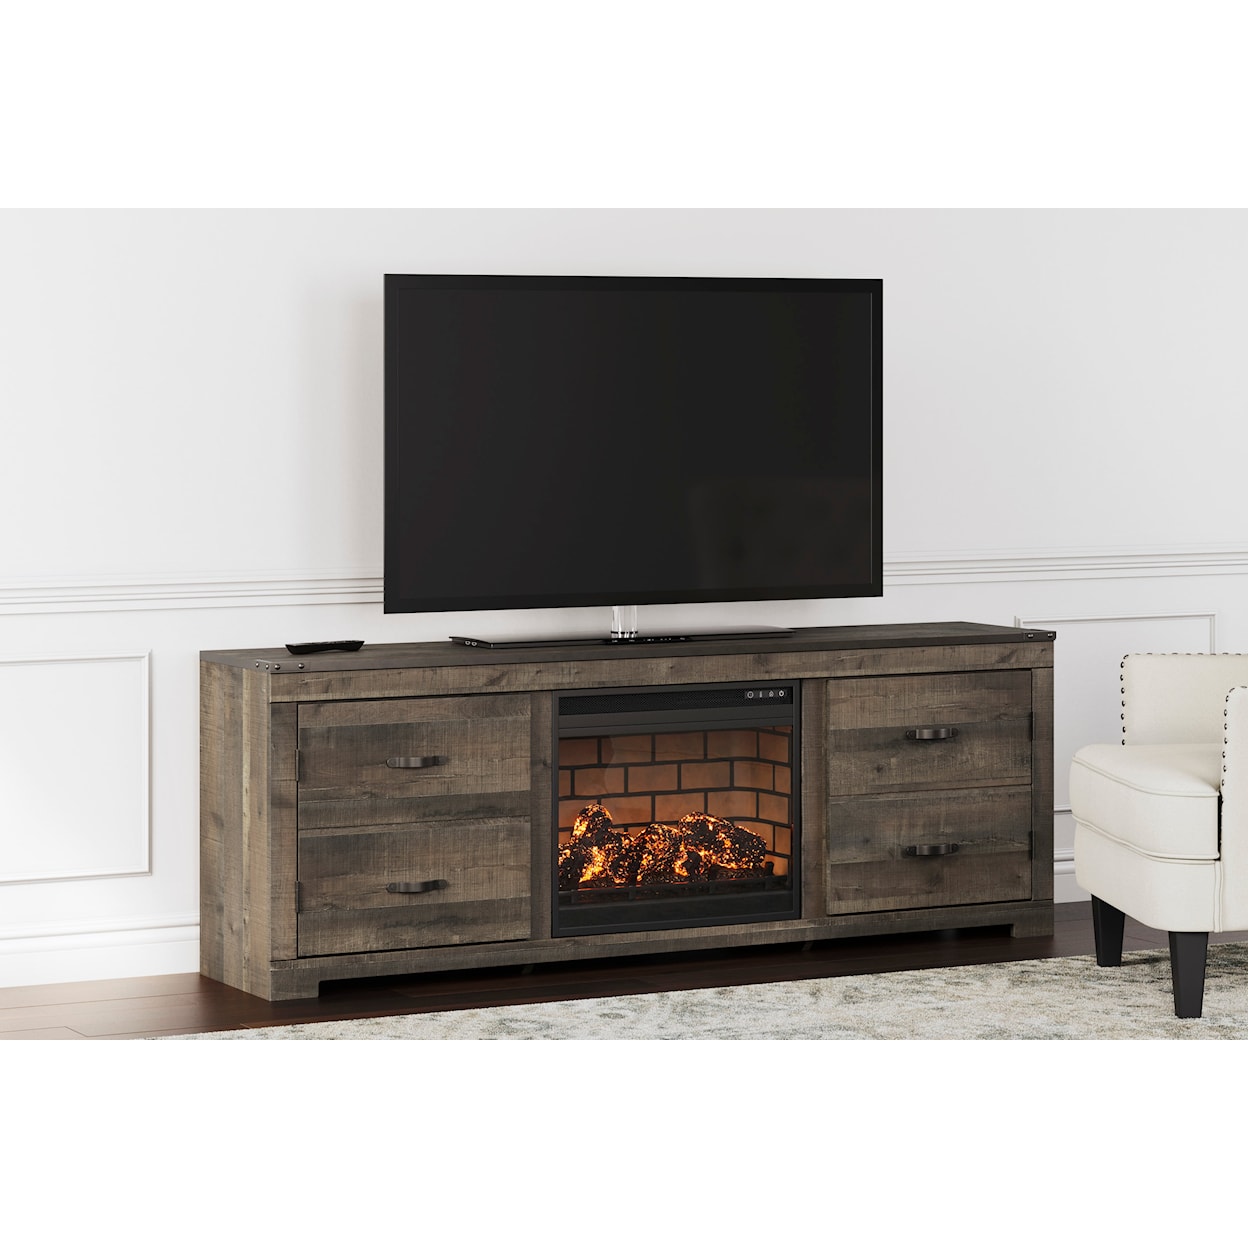 Benchcraft Trinell TV Stand with Electric Fireplace